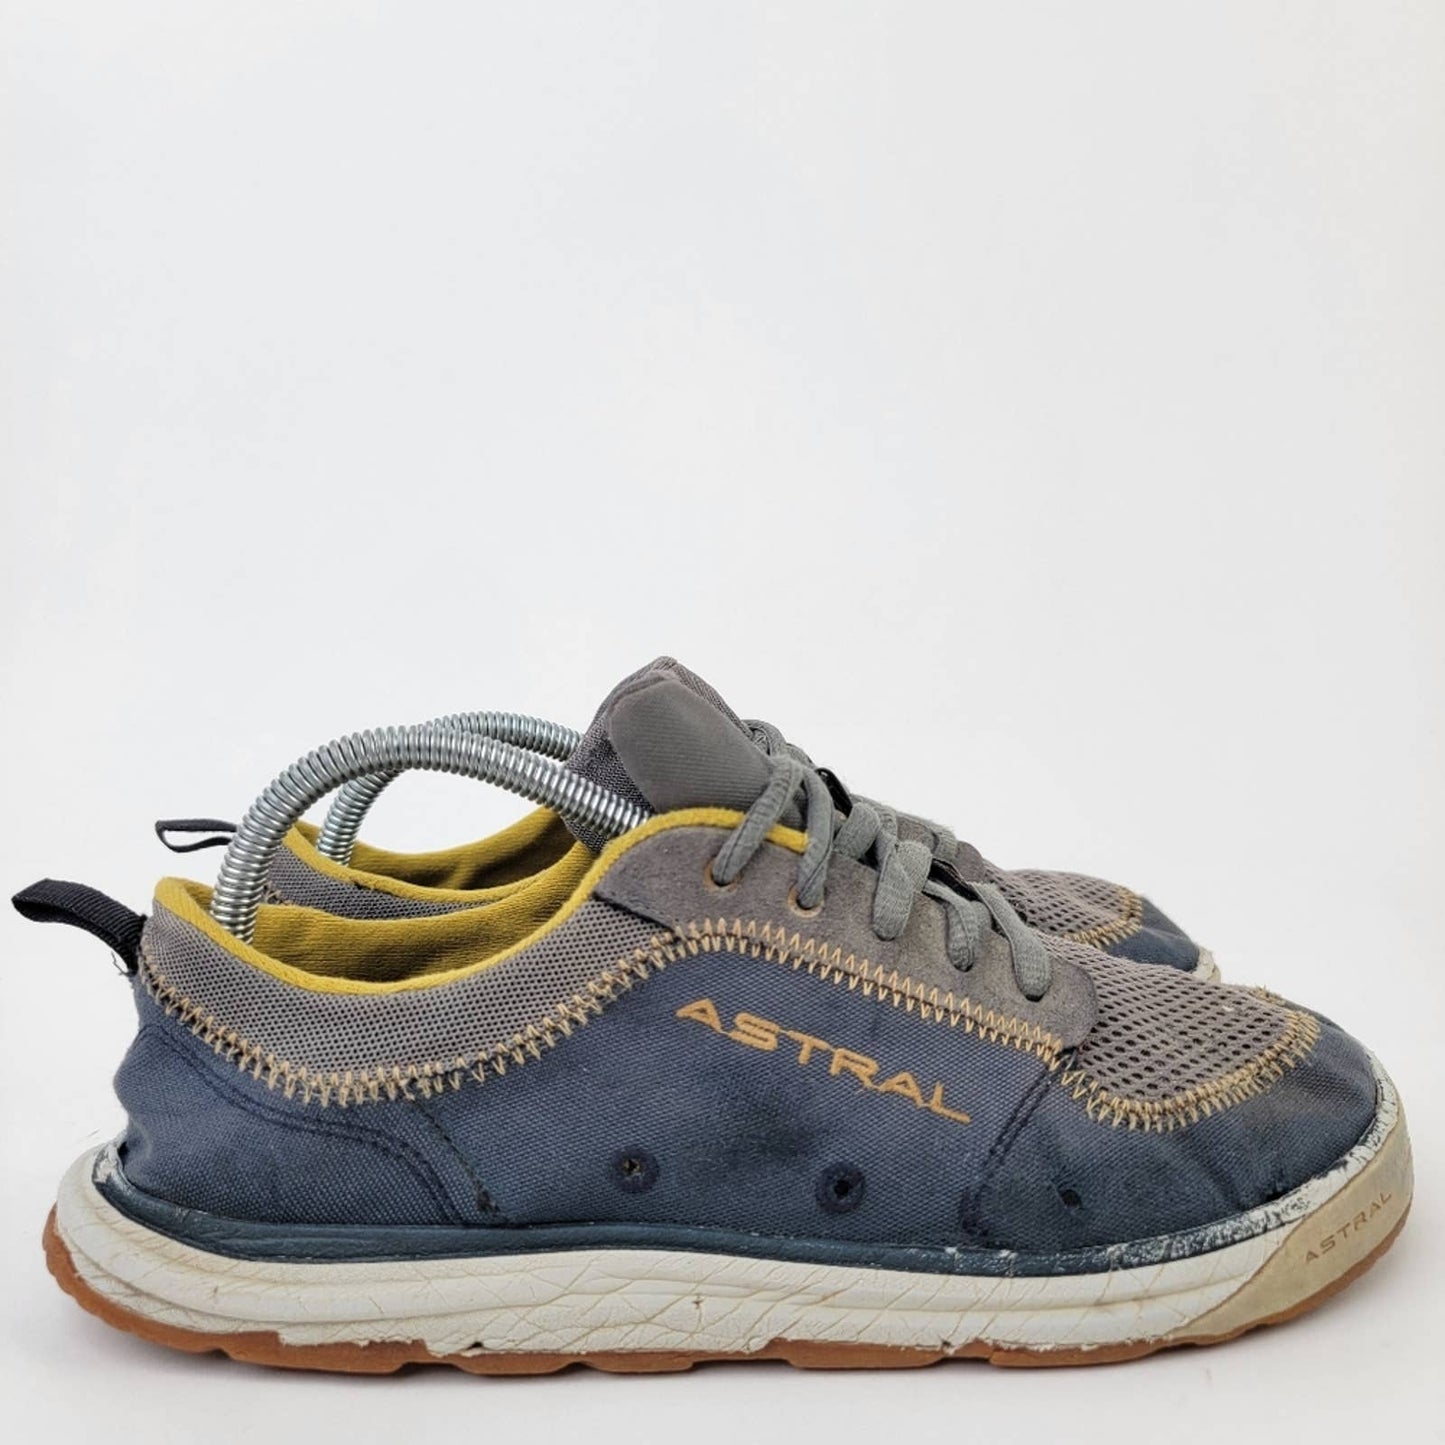 Astral Brewer 2.0 s Water Shoes - 9.5